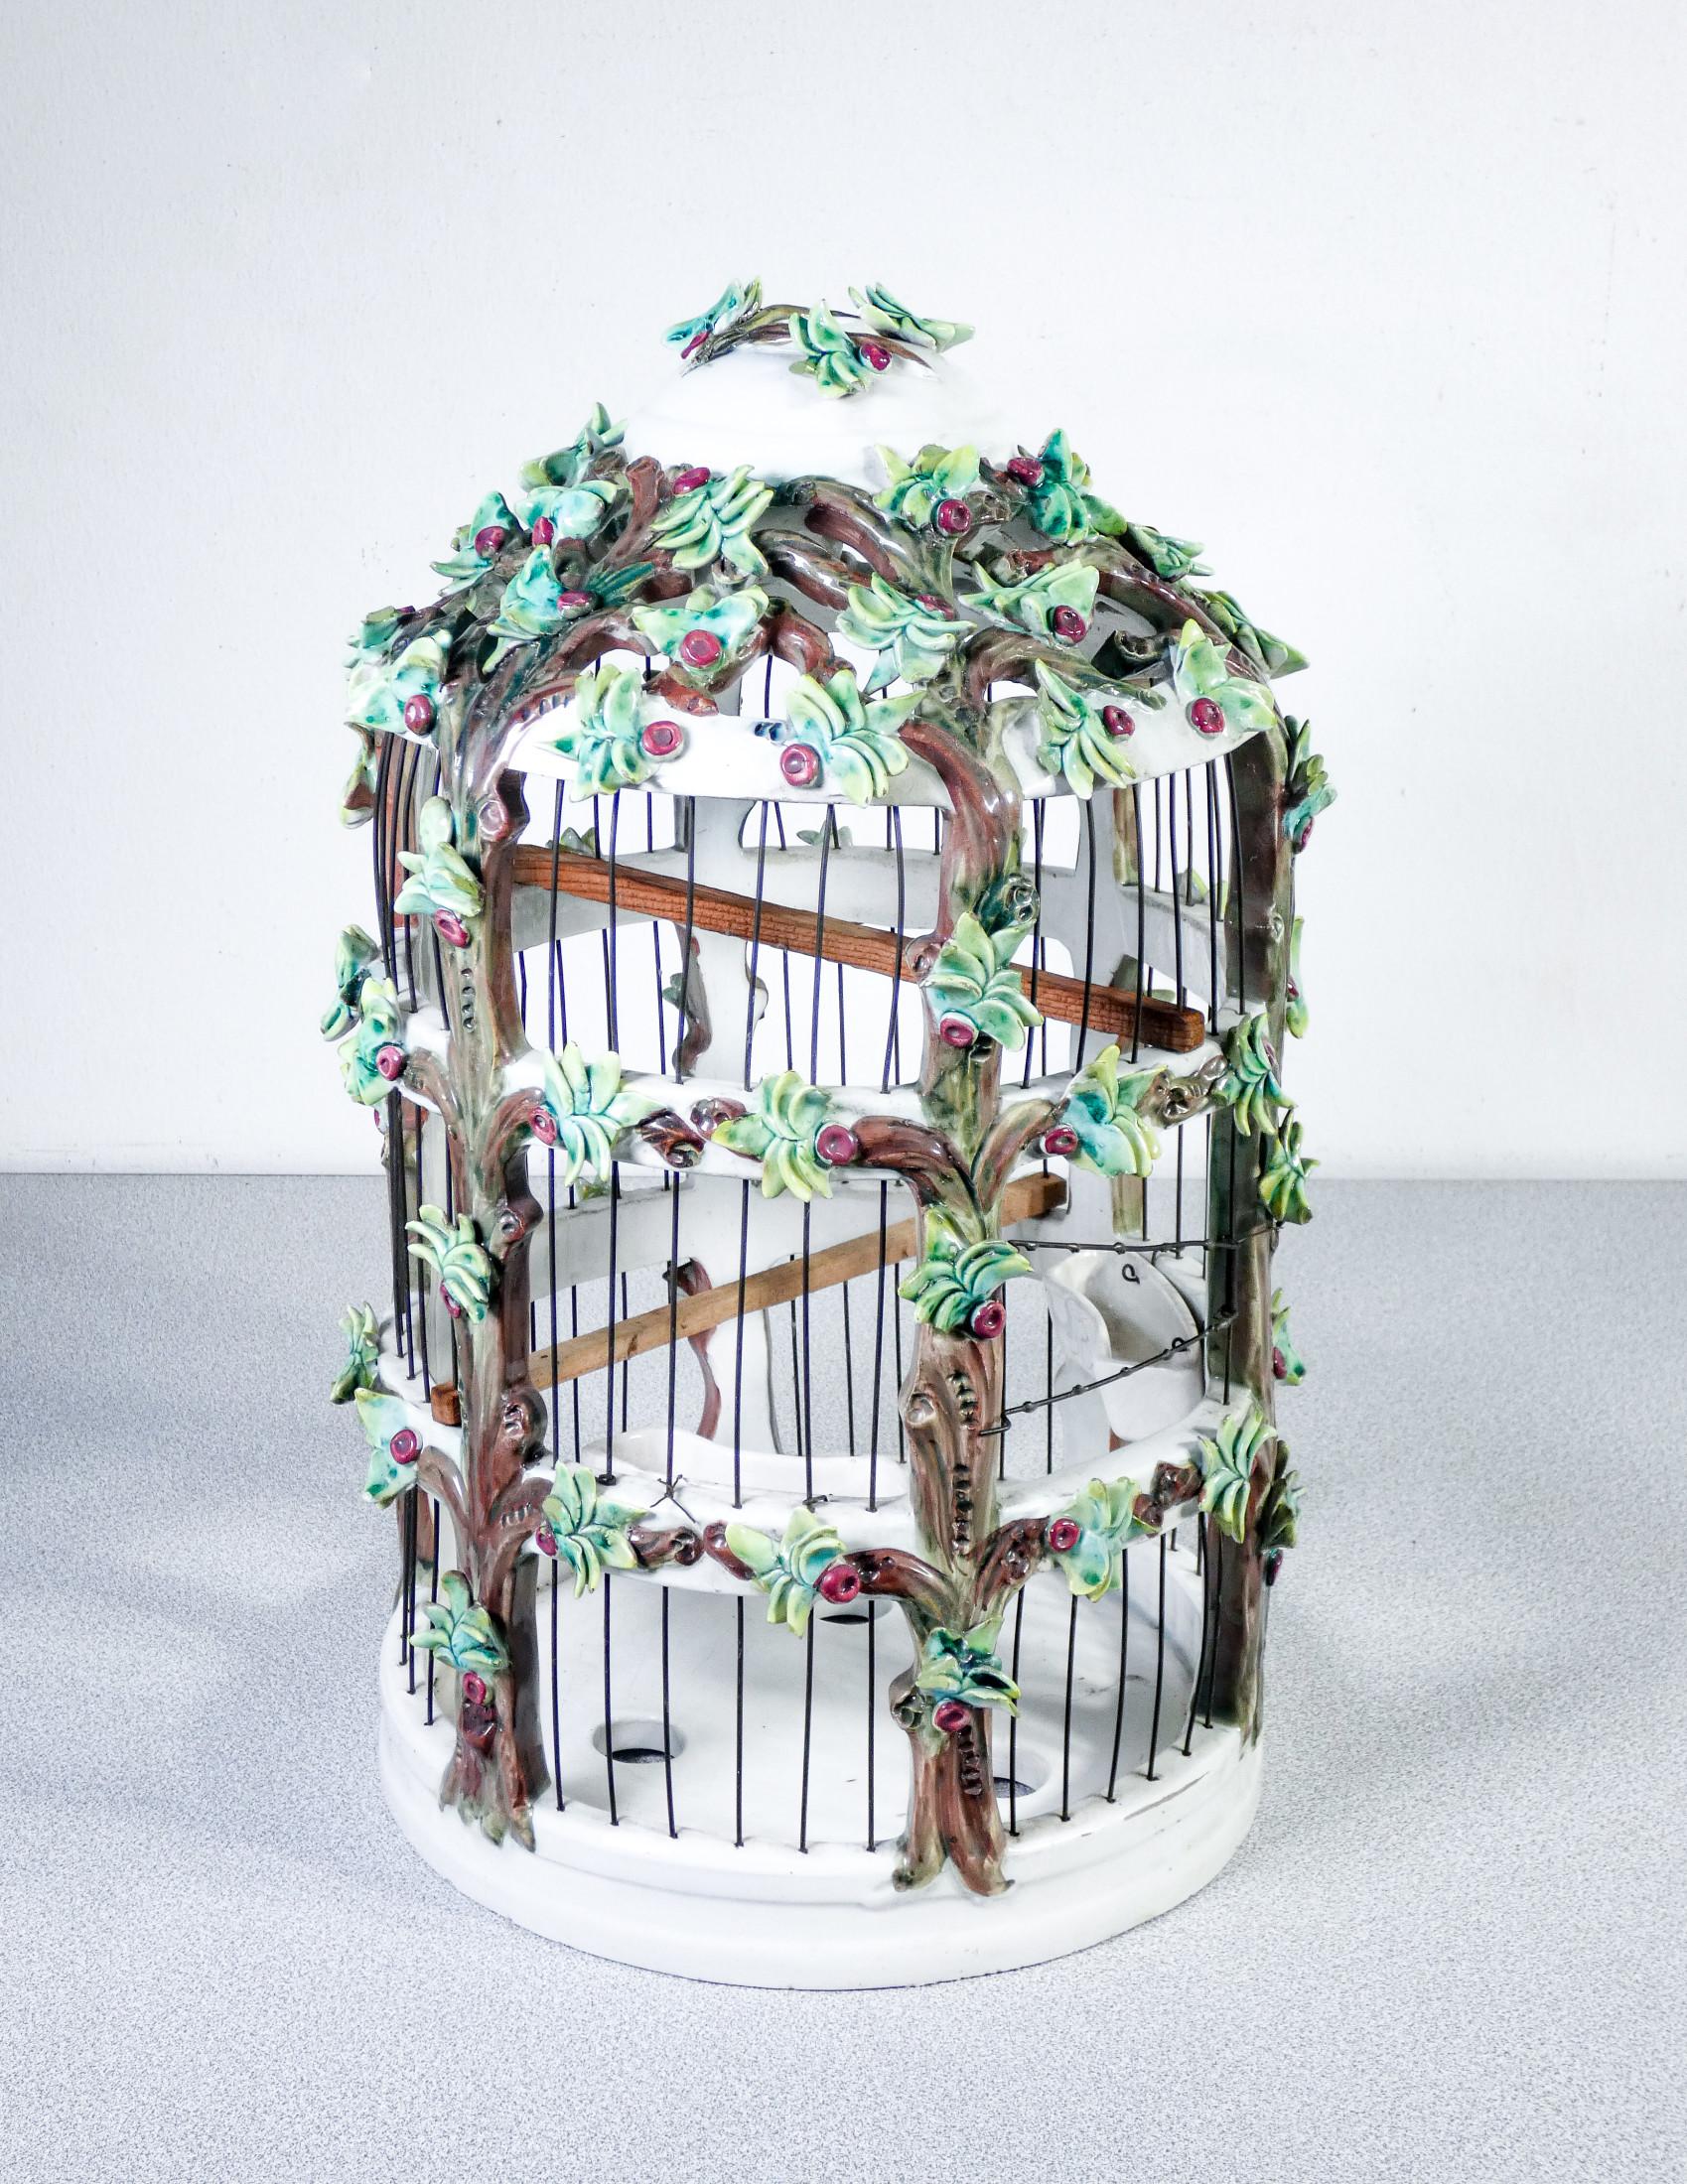 Unique hand painted ceramic
Aviary.
Italian manufacture

ORIGIN
Italy

PERIOD
Early twentieth century

MODEL
Aviary, bird cage

MATERIALS
Hand modeled
and painted ceramic

DIMENSIONS
H 42 cm
Ø 27 cm

CONDITIONS
The aviary is in